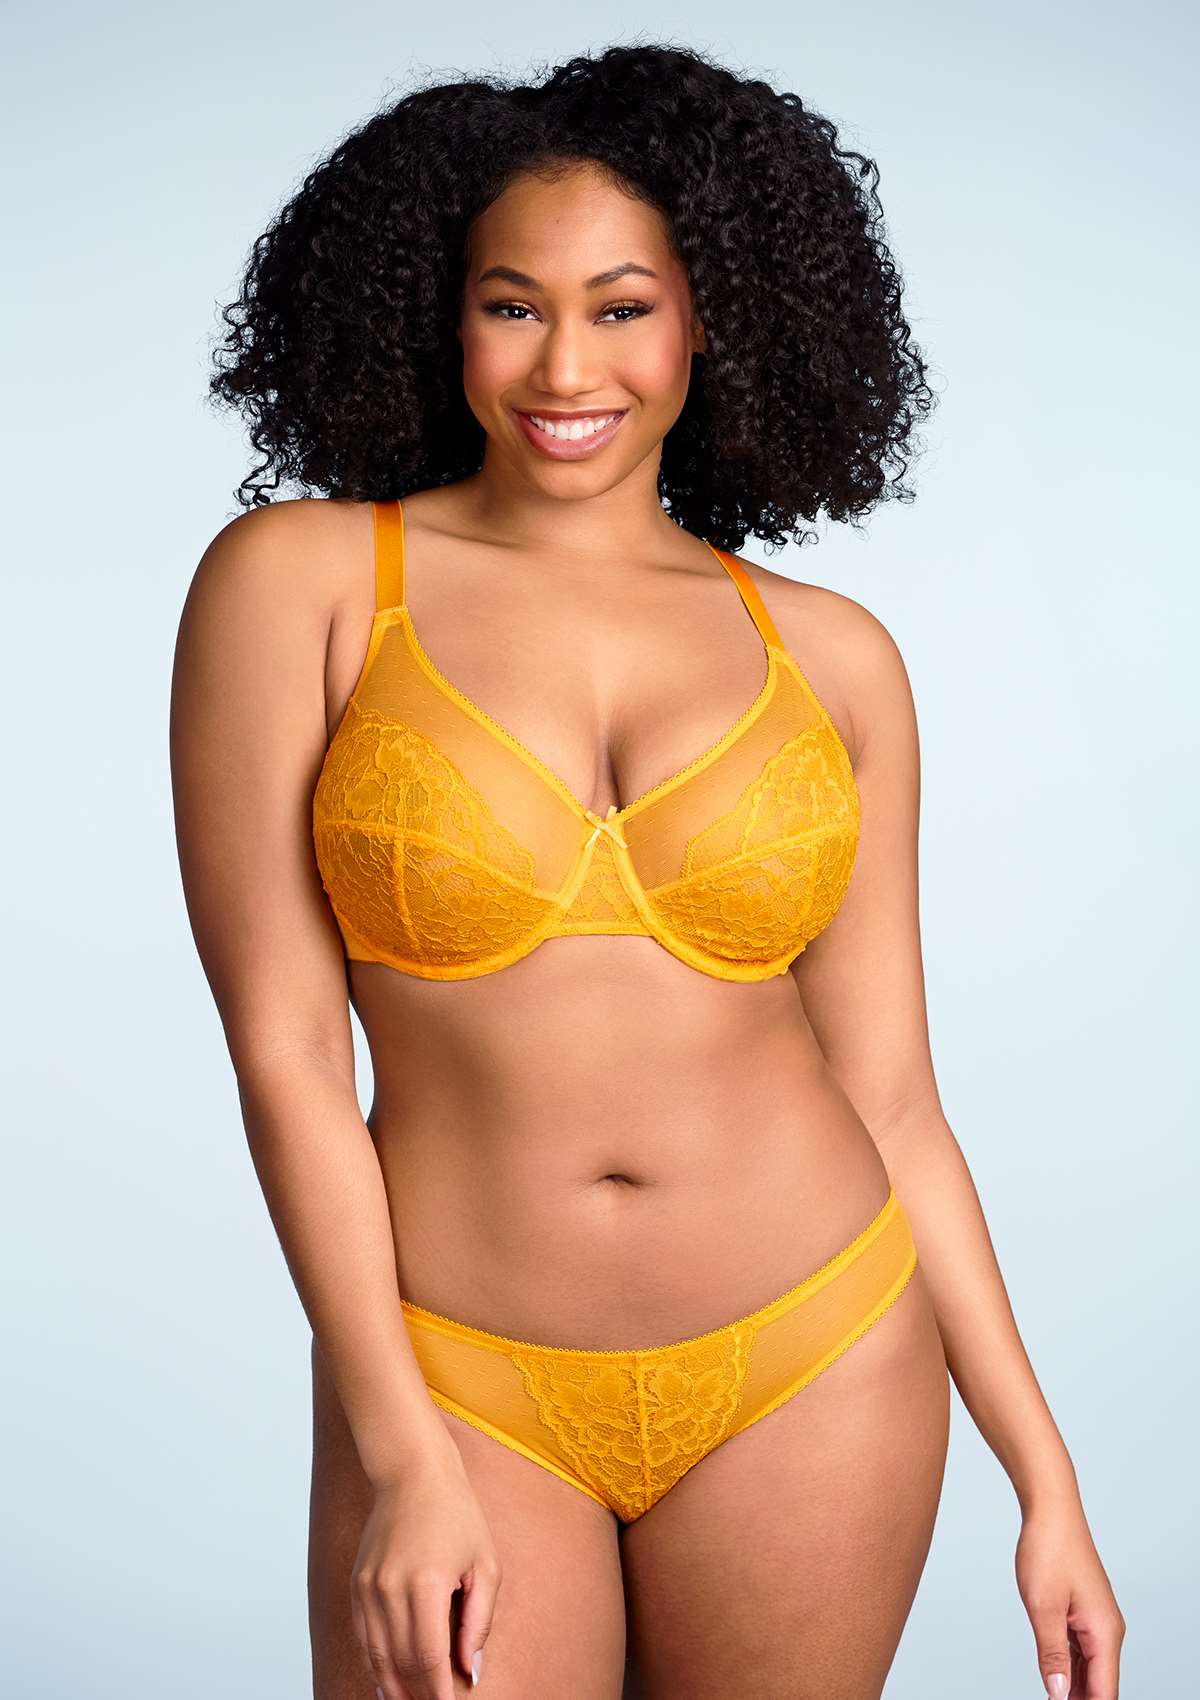 HSIA Enchante Bra And Panty Sets: Unpadded Bra With Back Support - Cadmium Yellow / 34 / D